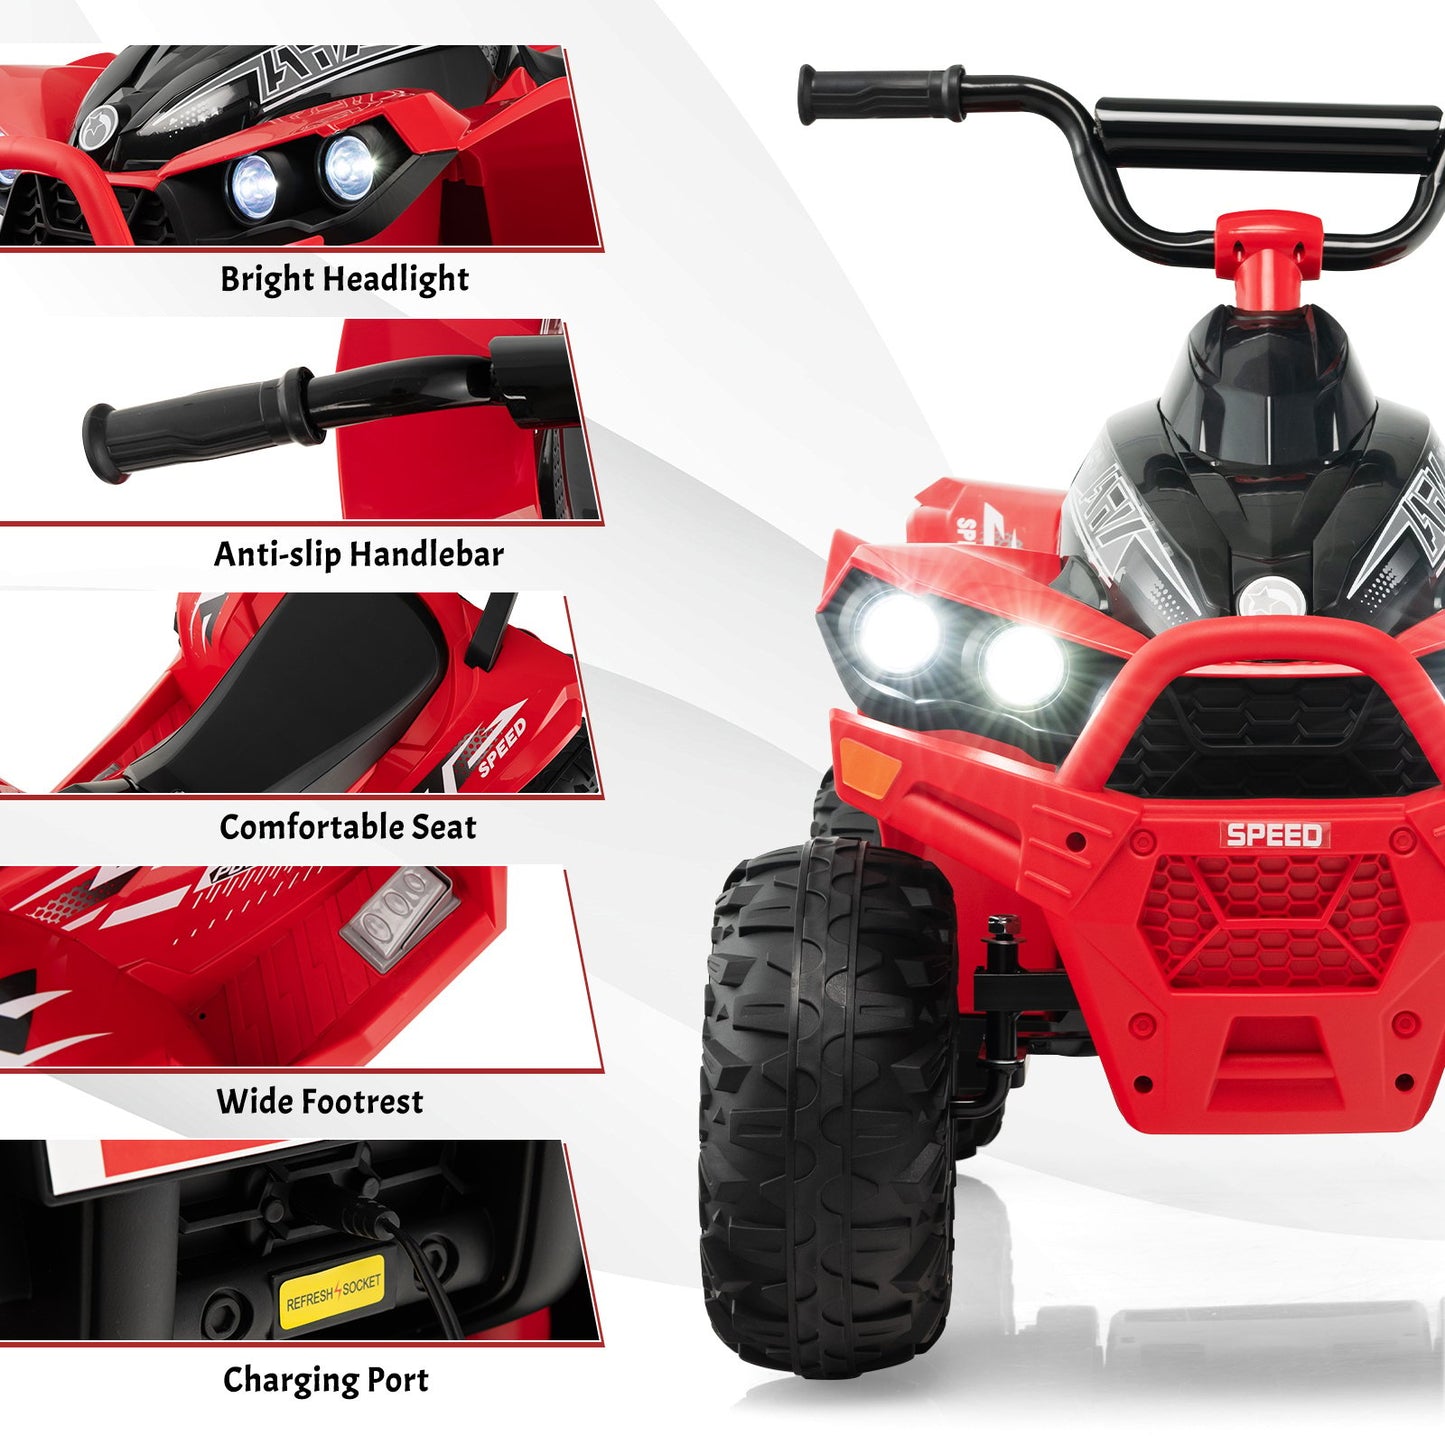 12V Kids Ride On ATV with High/Low Speed and Comfortable Seat, Red